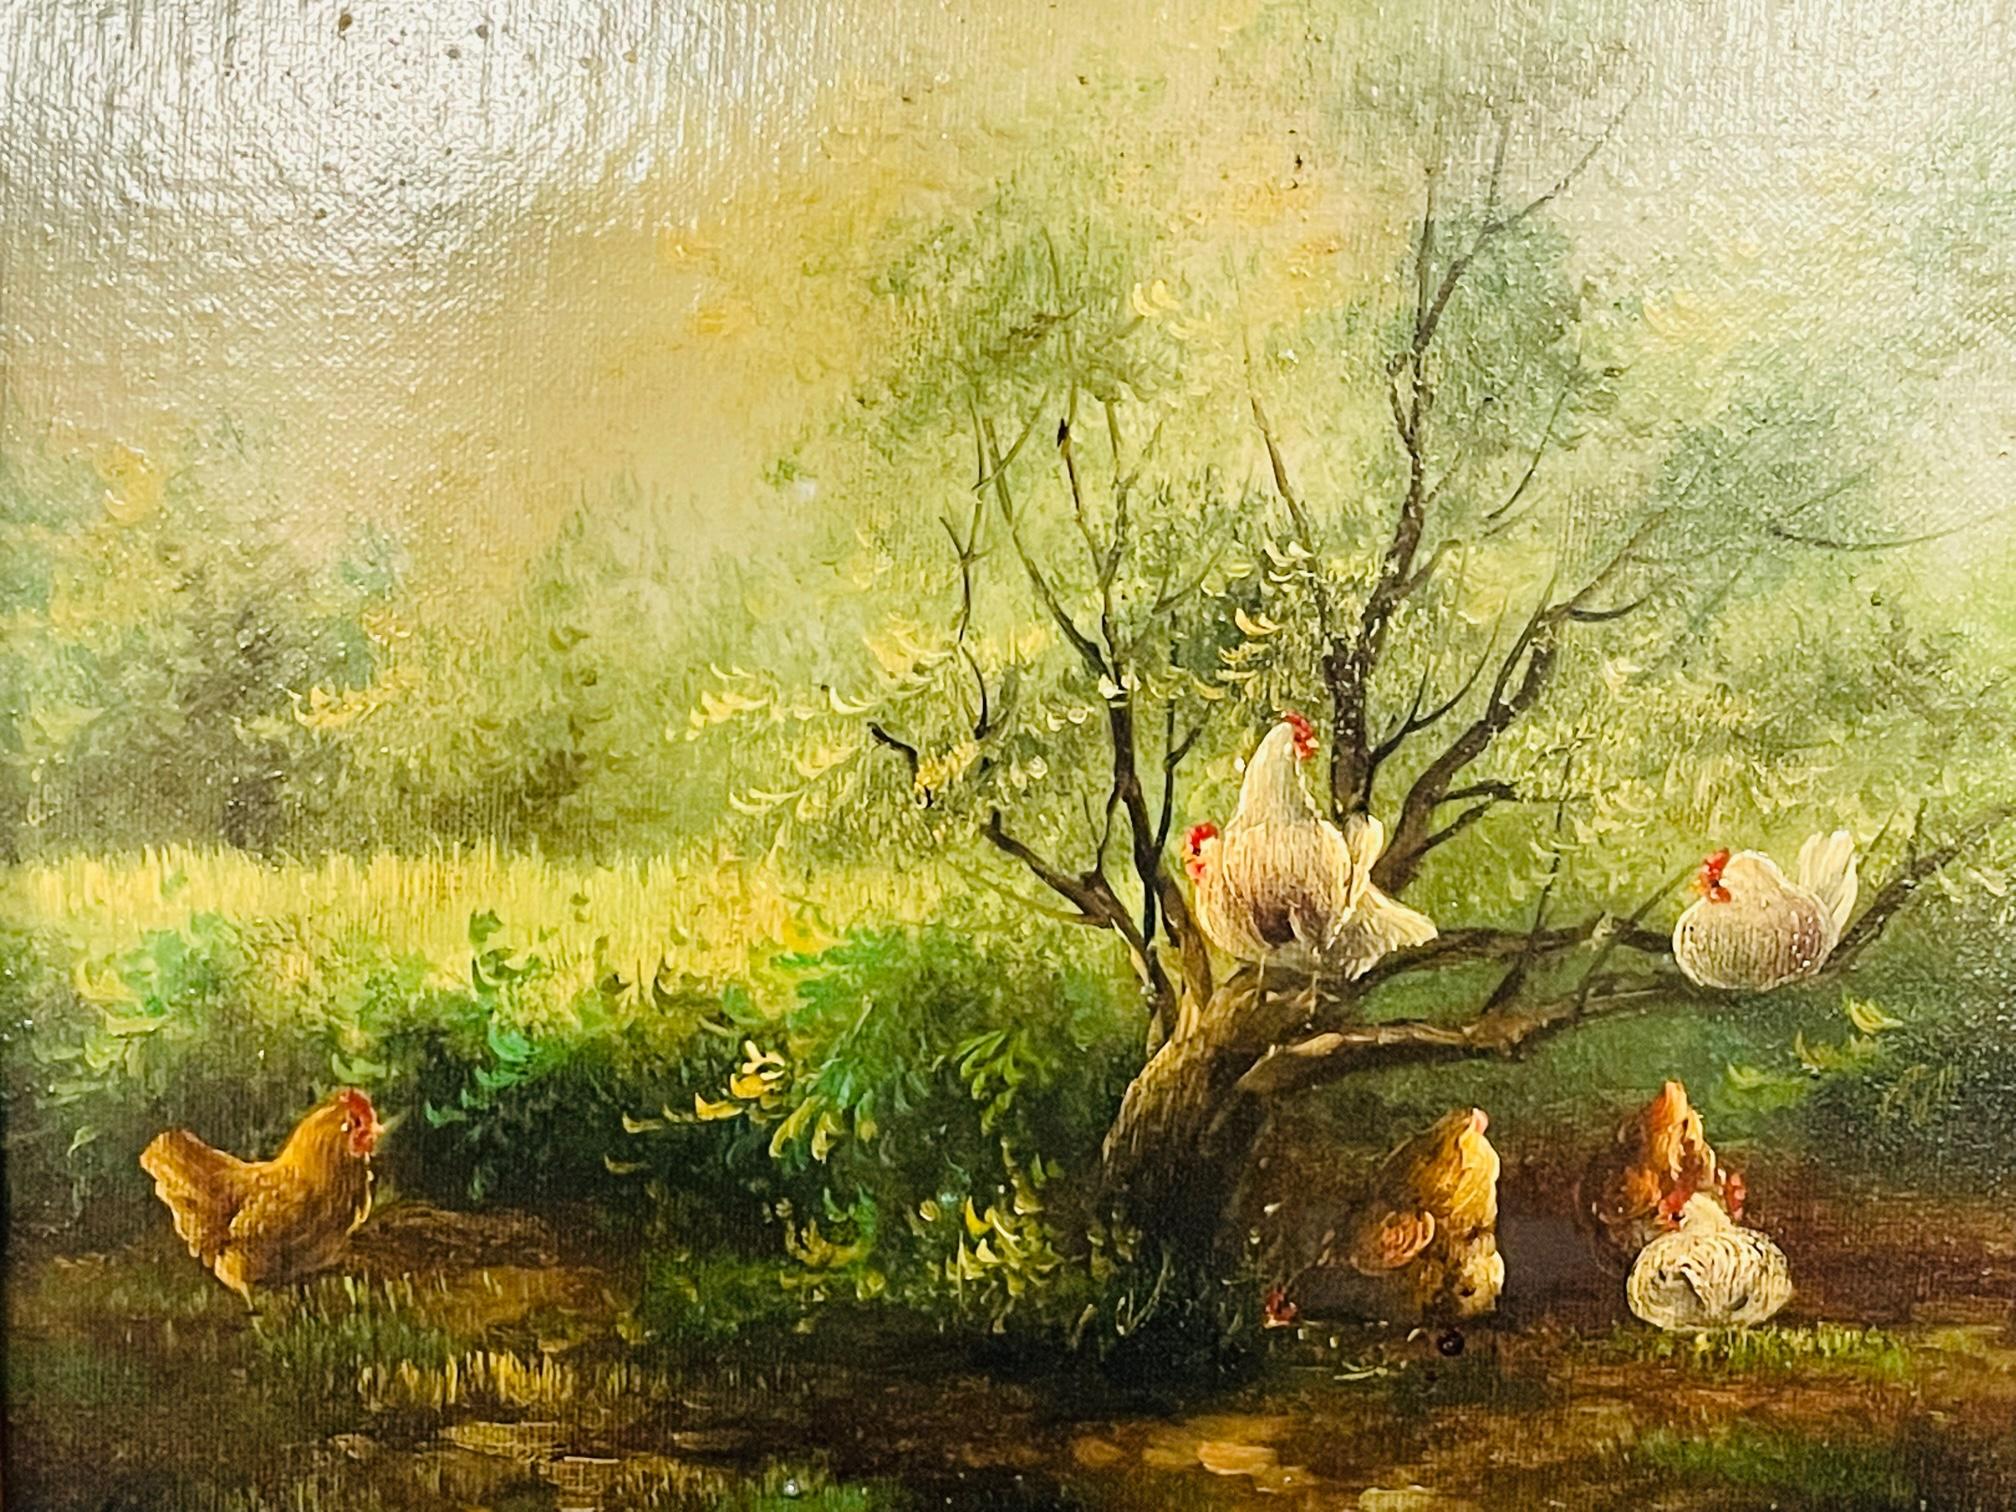 Modern Hens in a Farm Oil on Canvas Painting Signed 